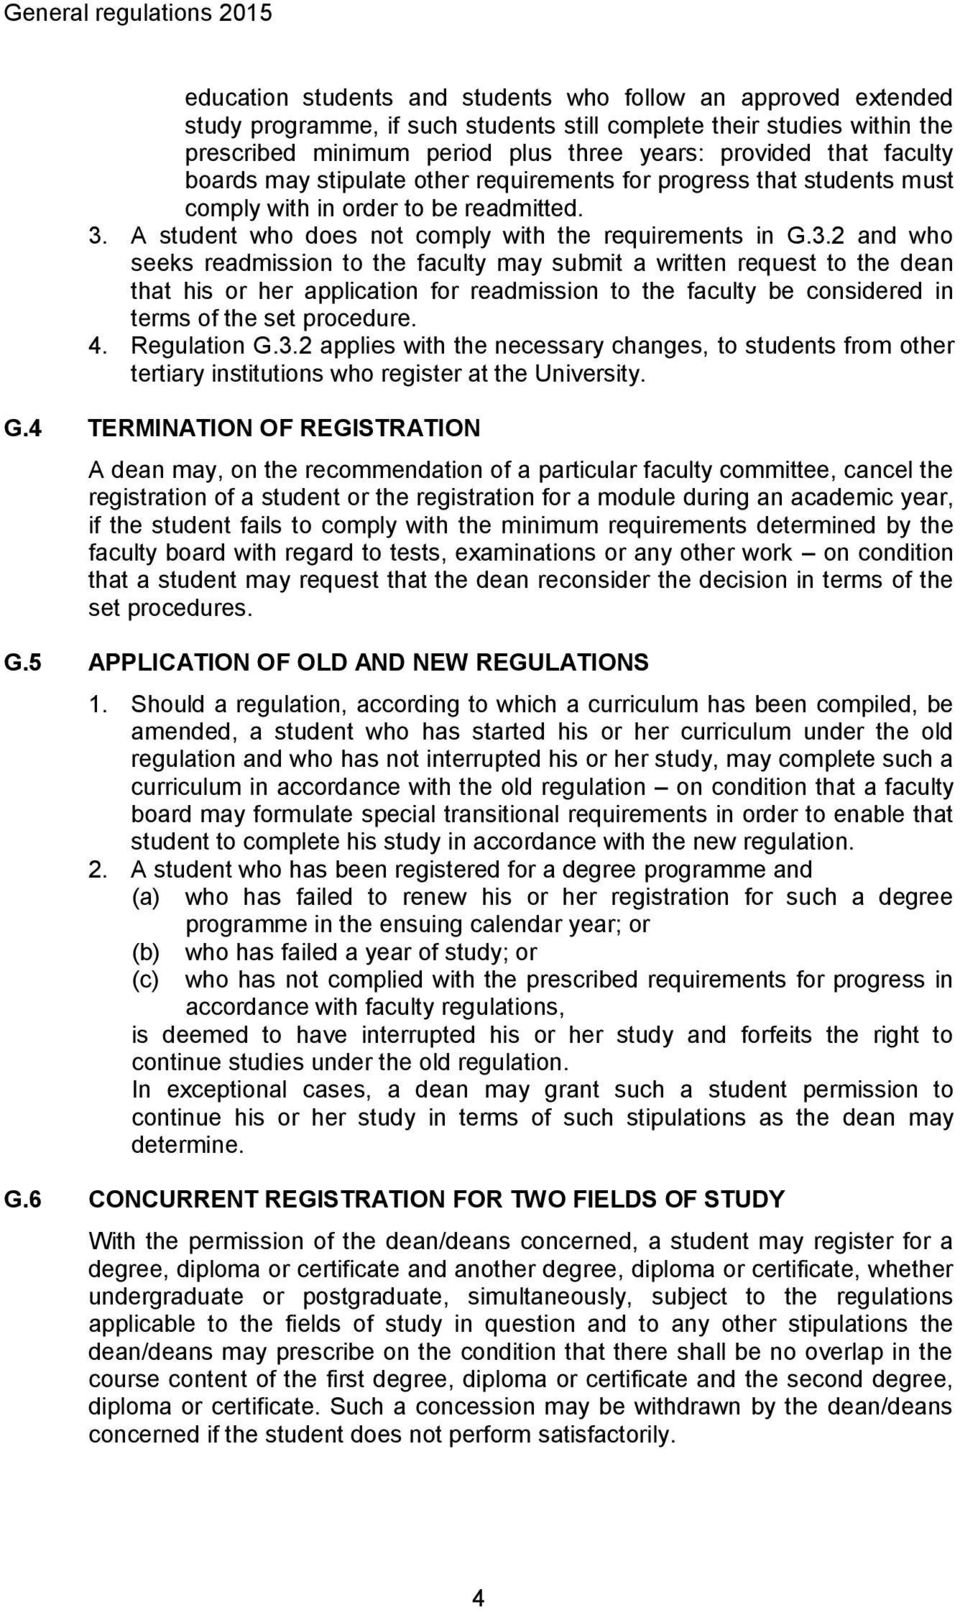 3.2 and who seeks readmission to the faculty may submit a written request to the dean that his or her application for readmission to the faculty be considered in terms of the set procedure. 4.